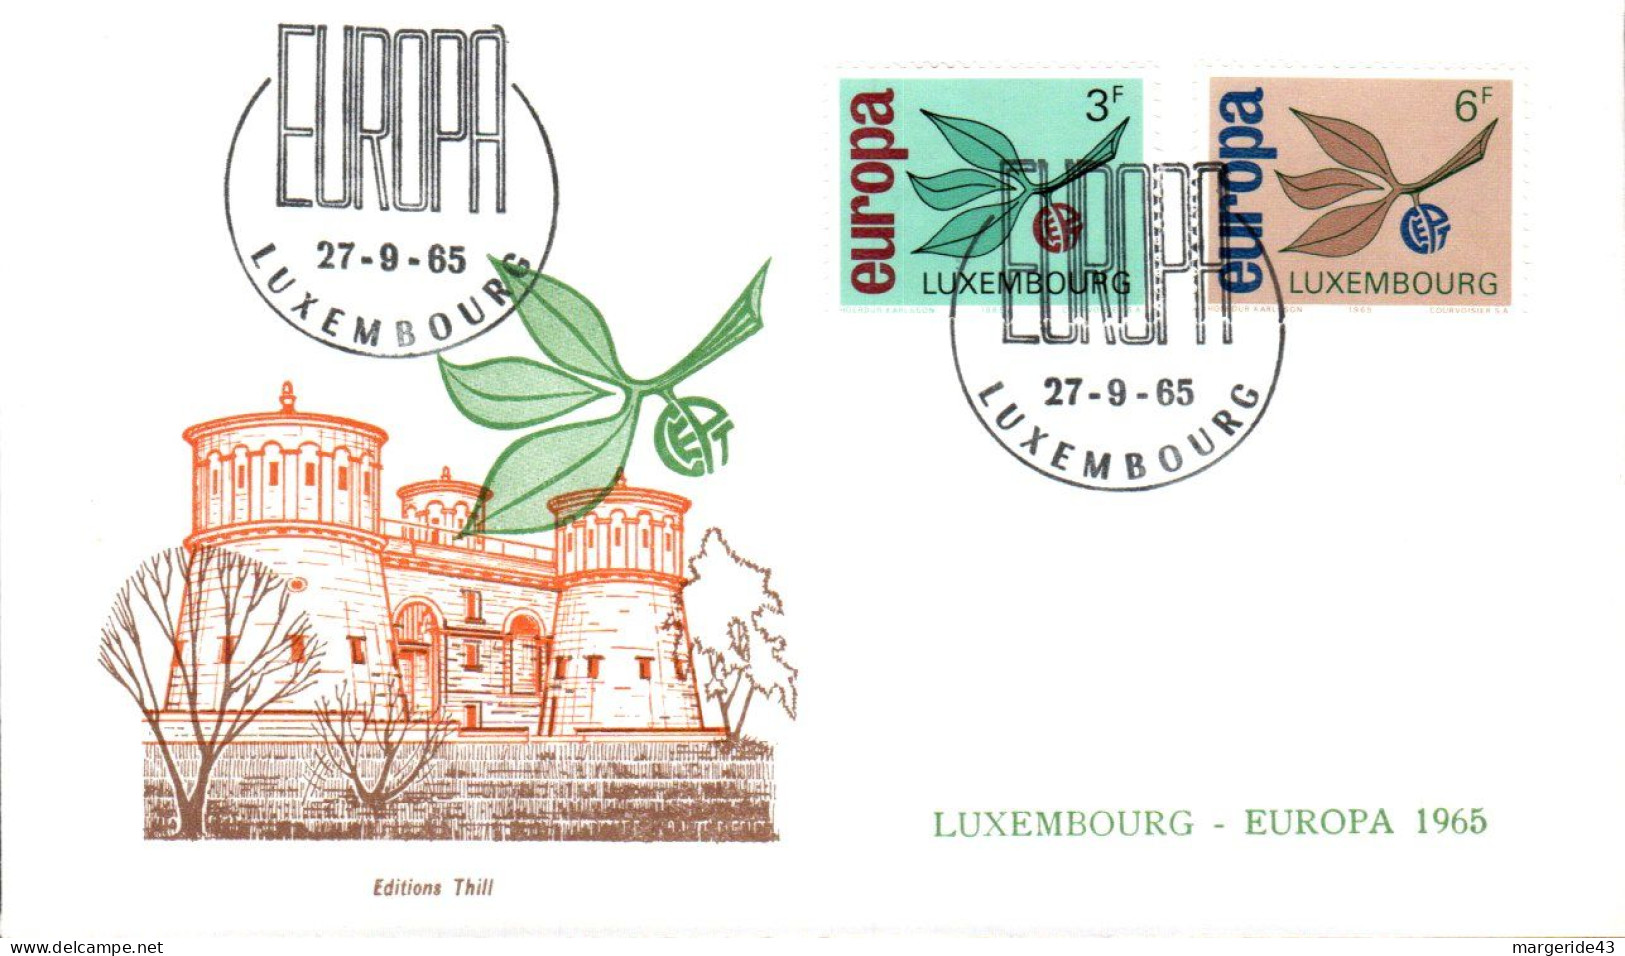 EUROPA 1965 LUXEMBOURG FDC - 1965